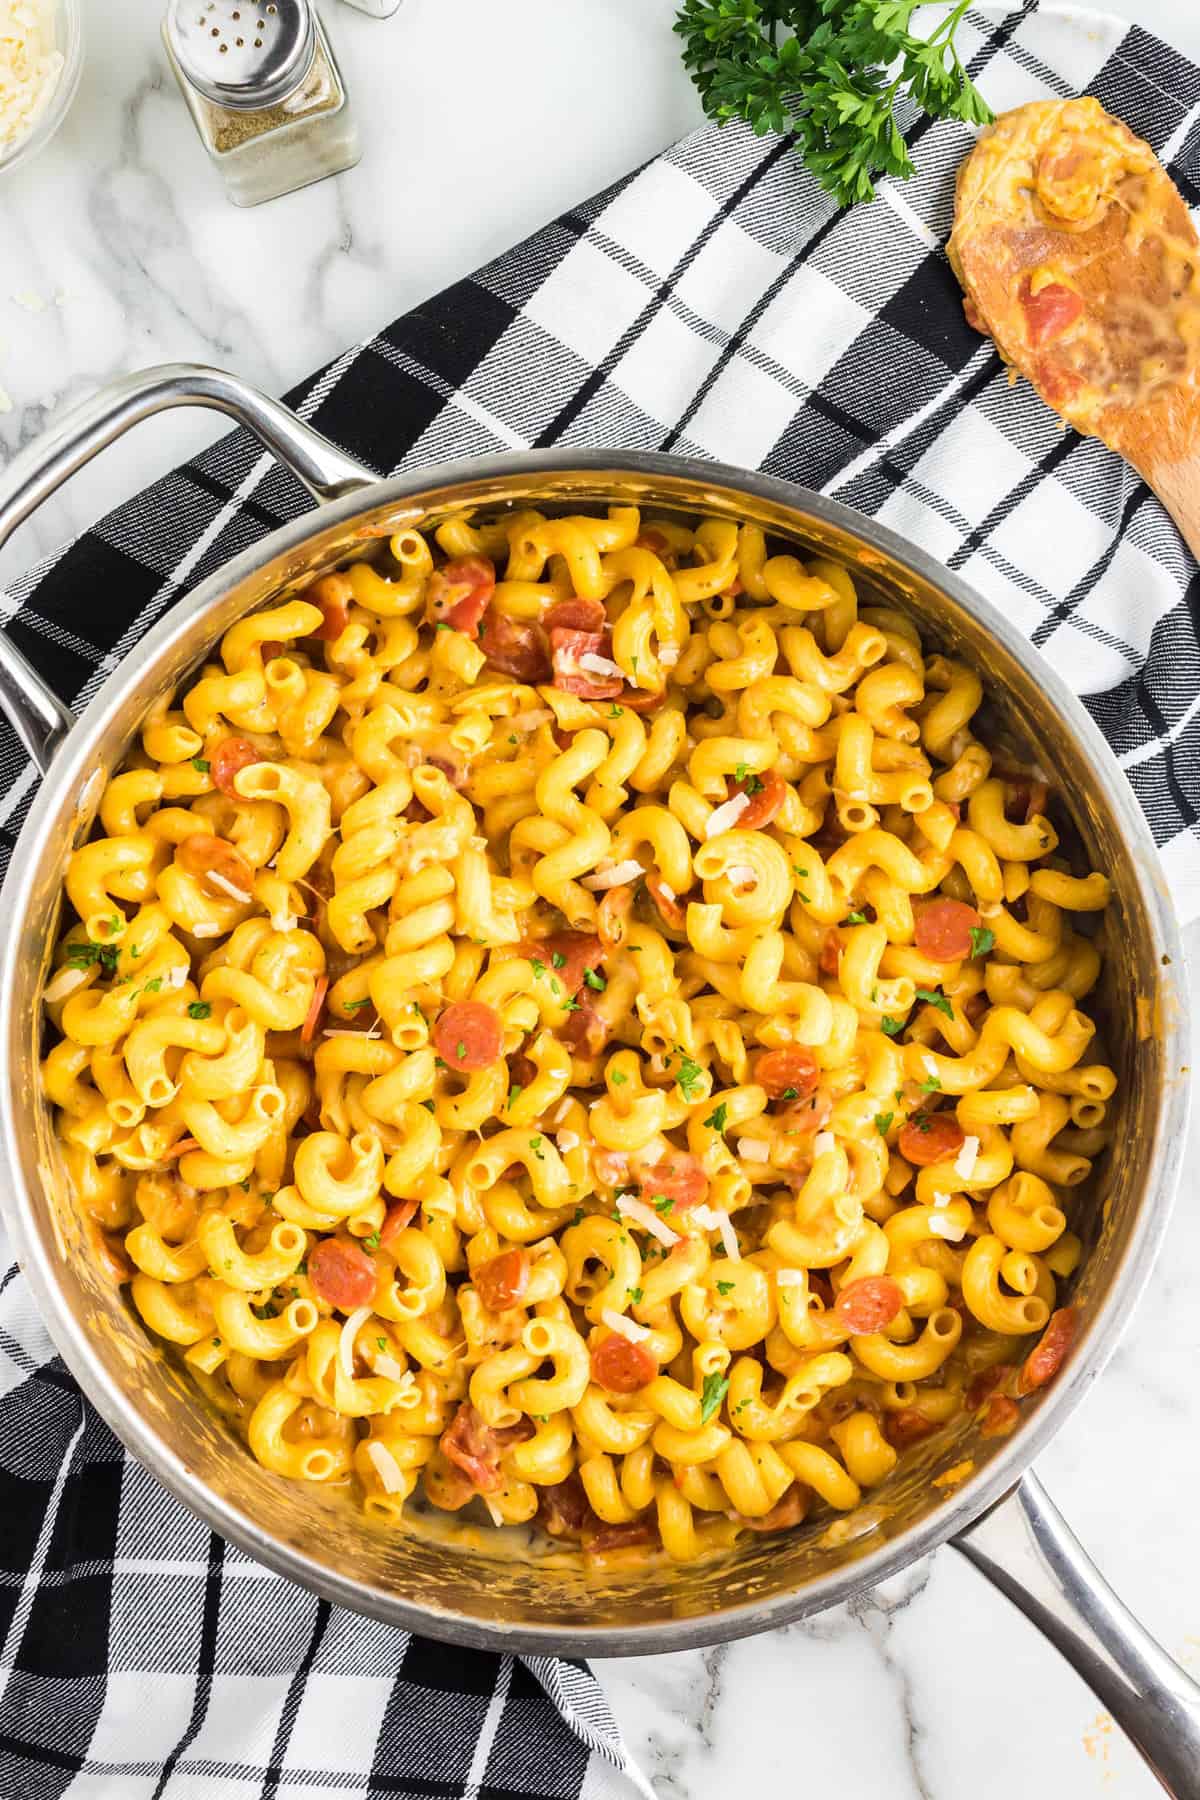 One Pot Pasta Meal Ready for Serving